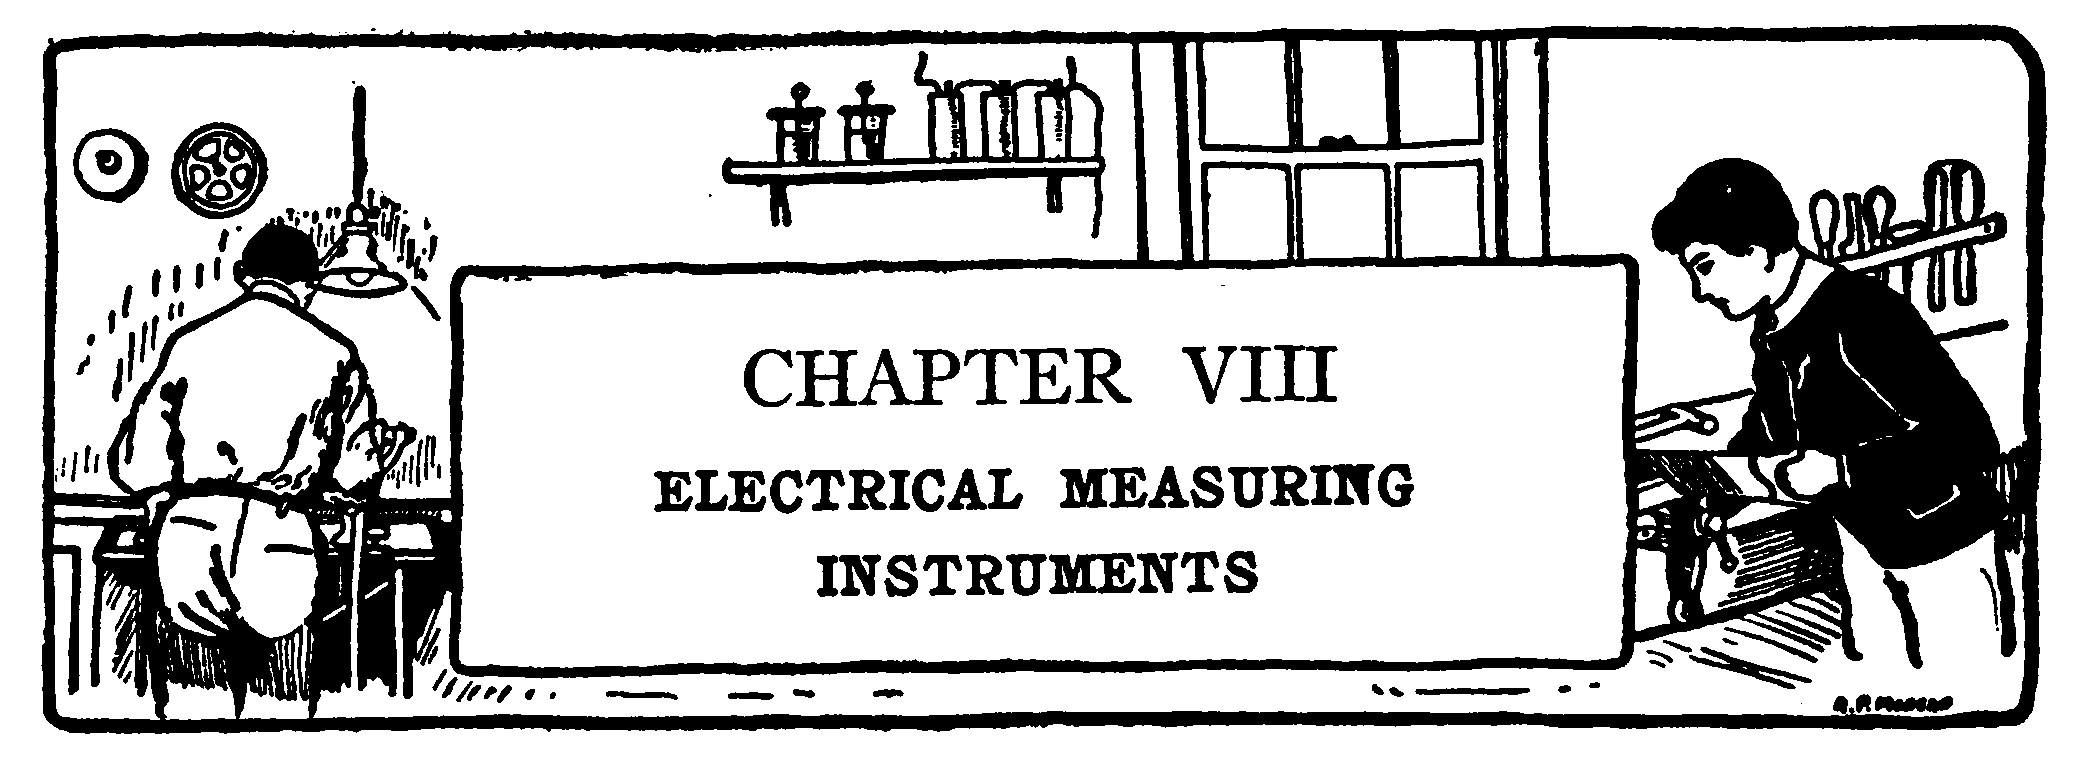 ELECTRICAL MEASURING INSTRUMENTS